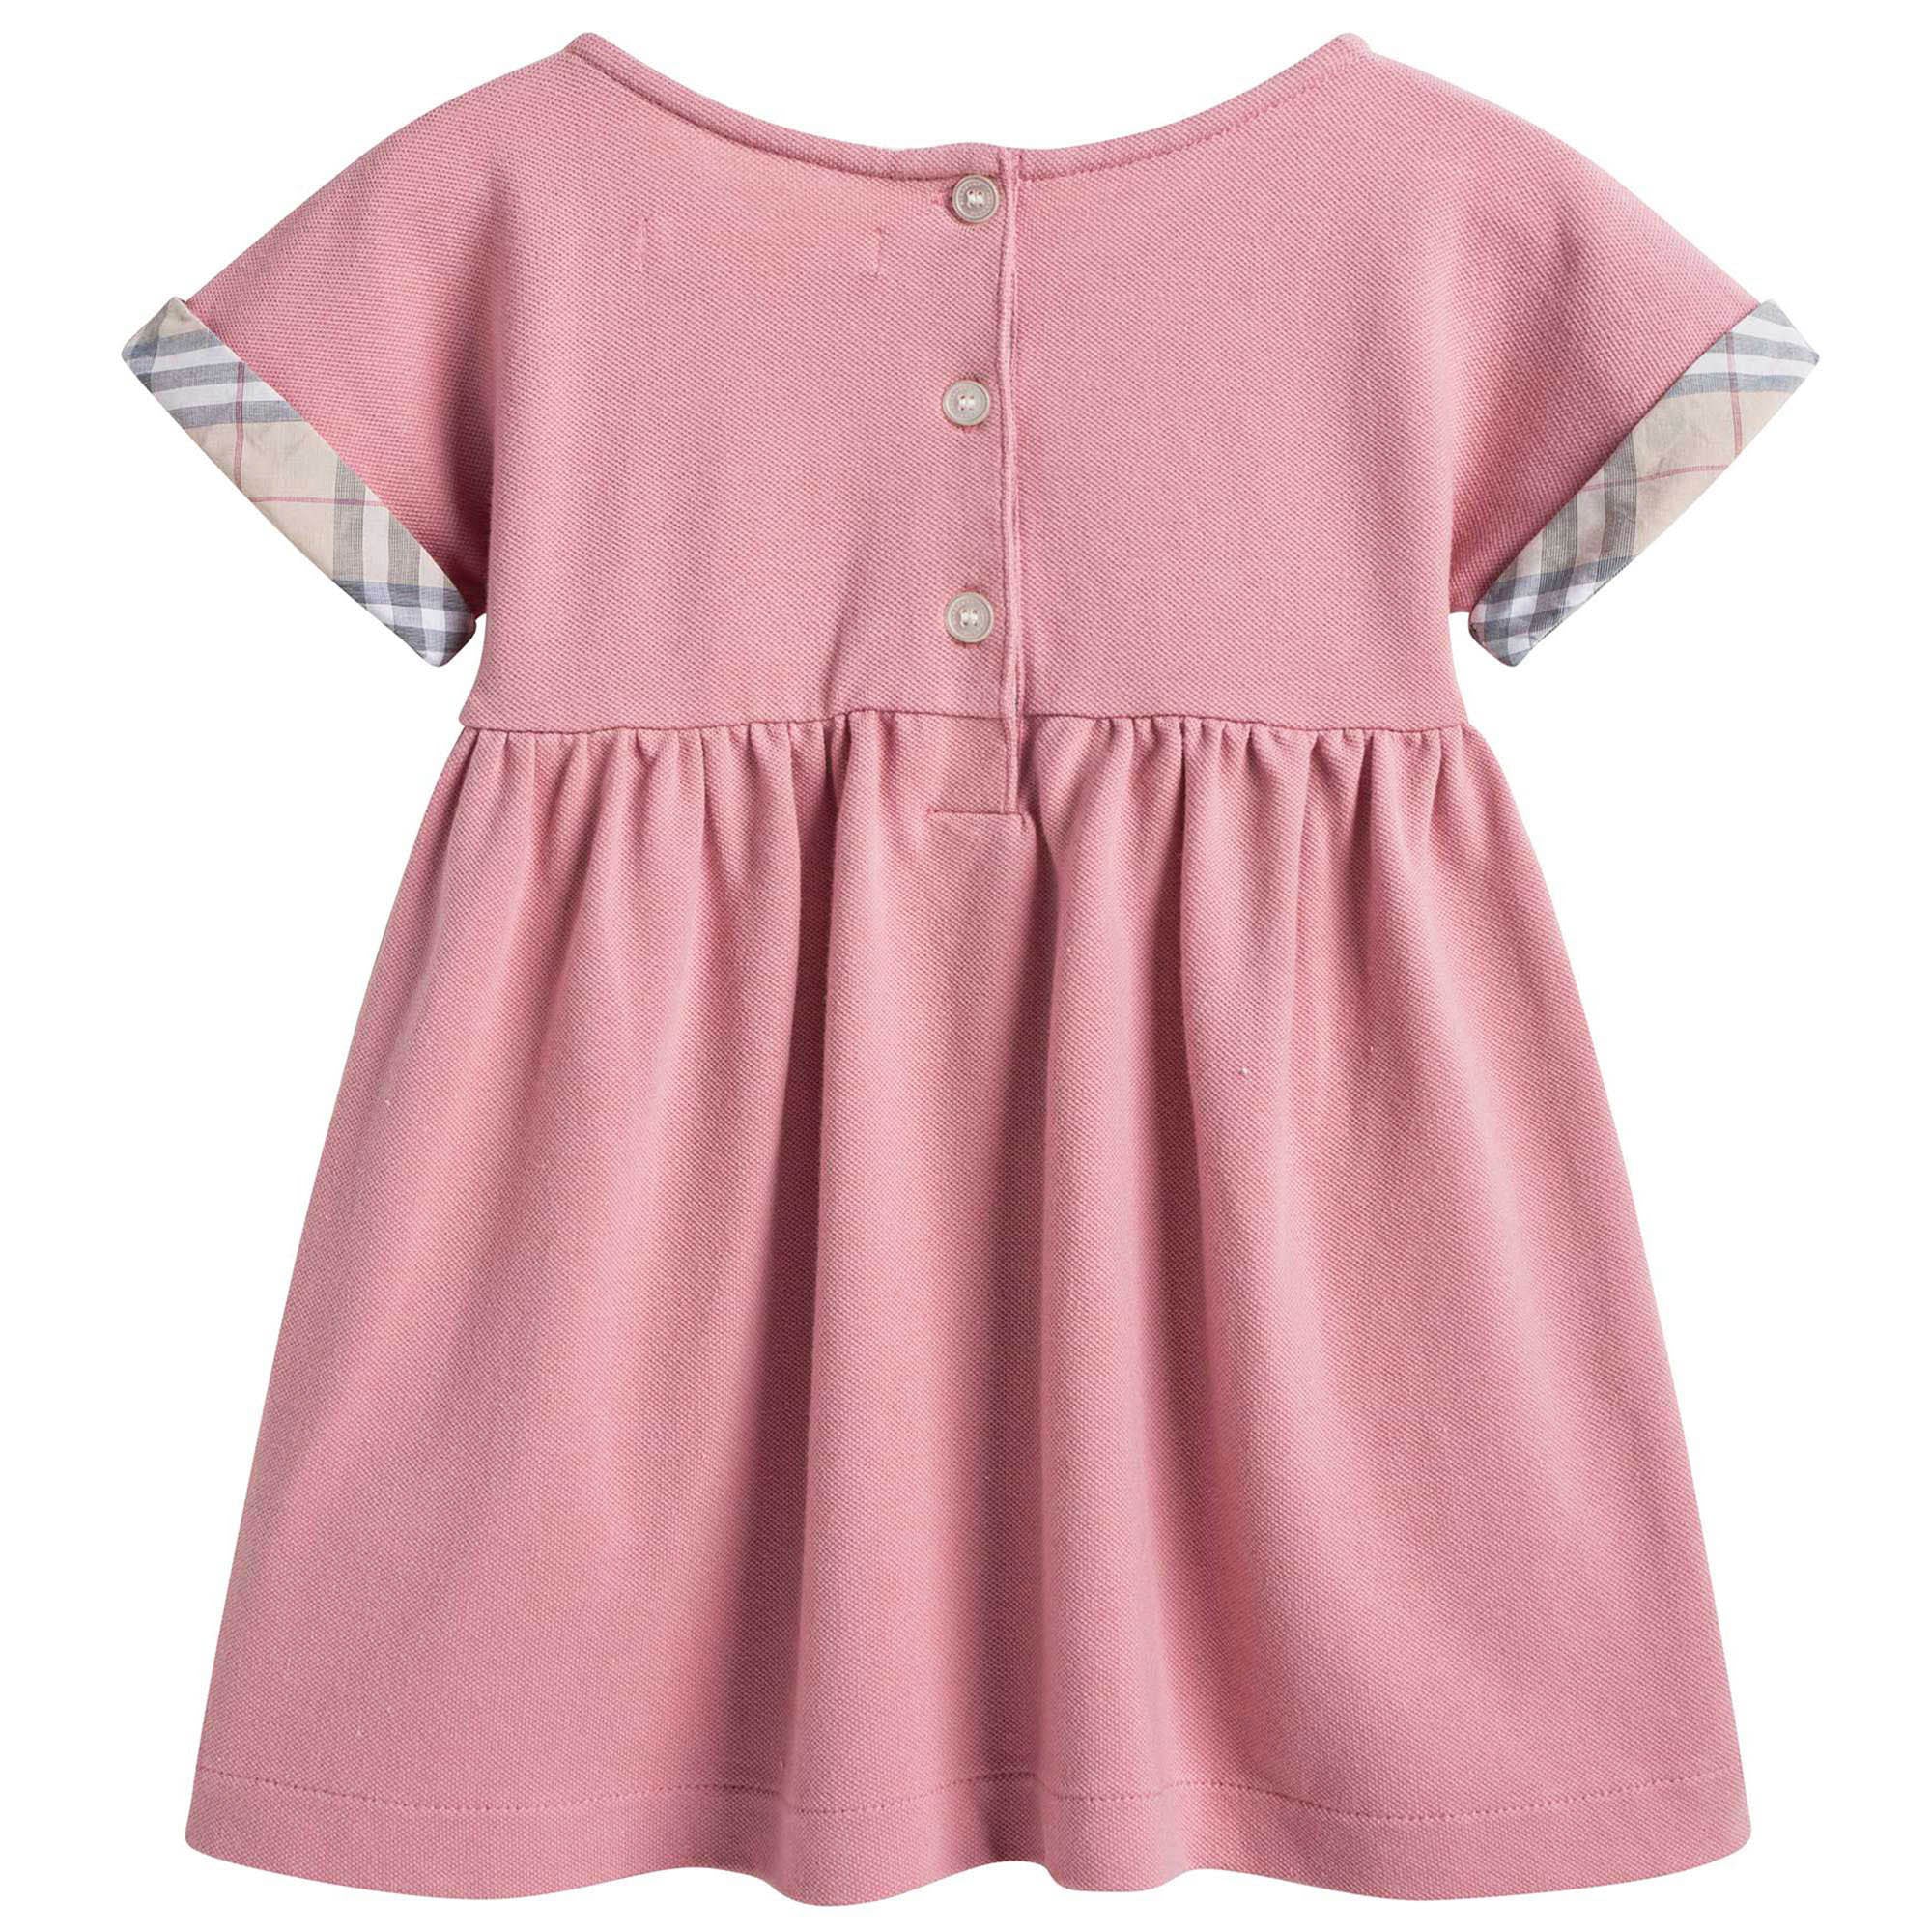 Baby Girls Pink Cotton Dress With Check Trim